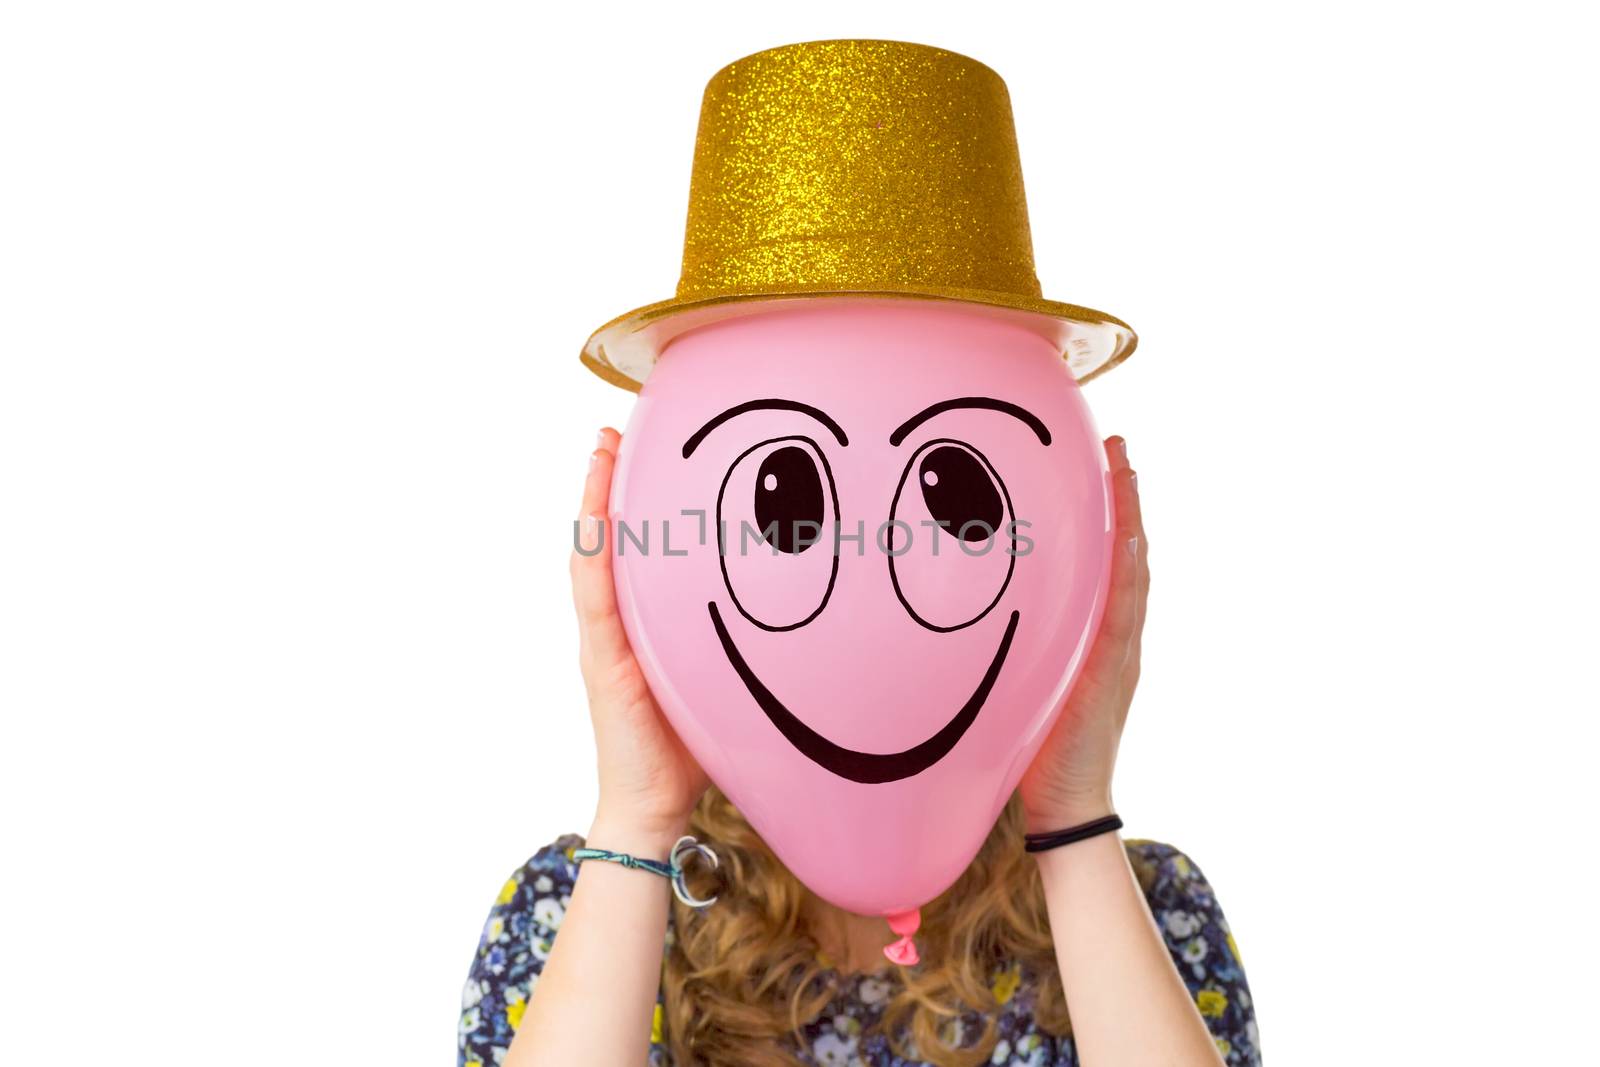 Girl holding balloon with smiling face and hat by BenSchonewille